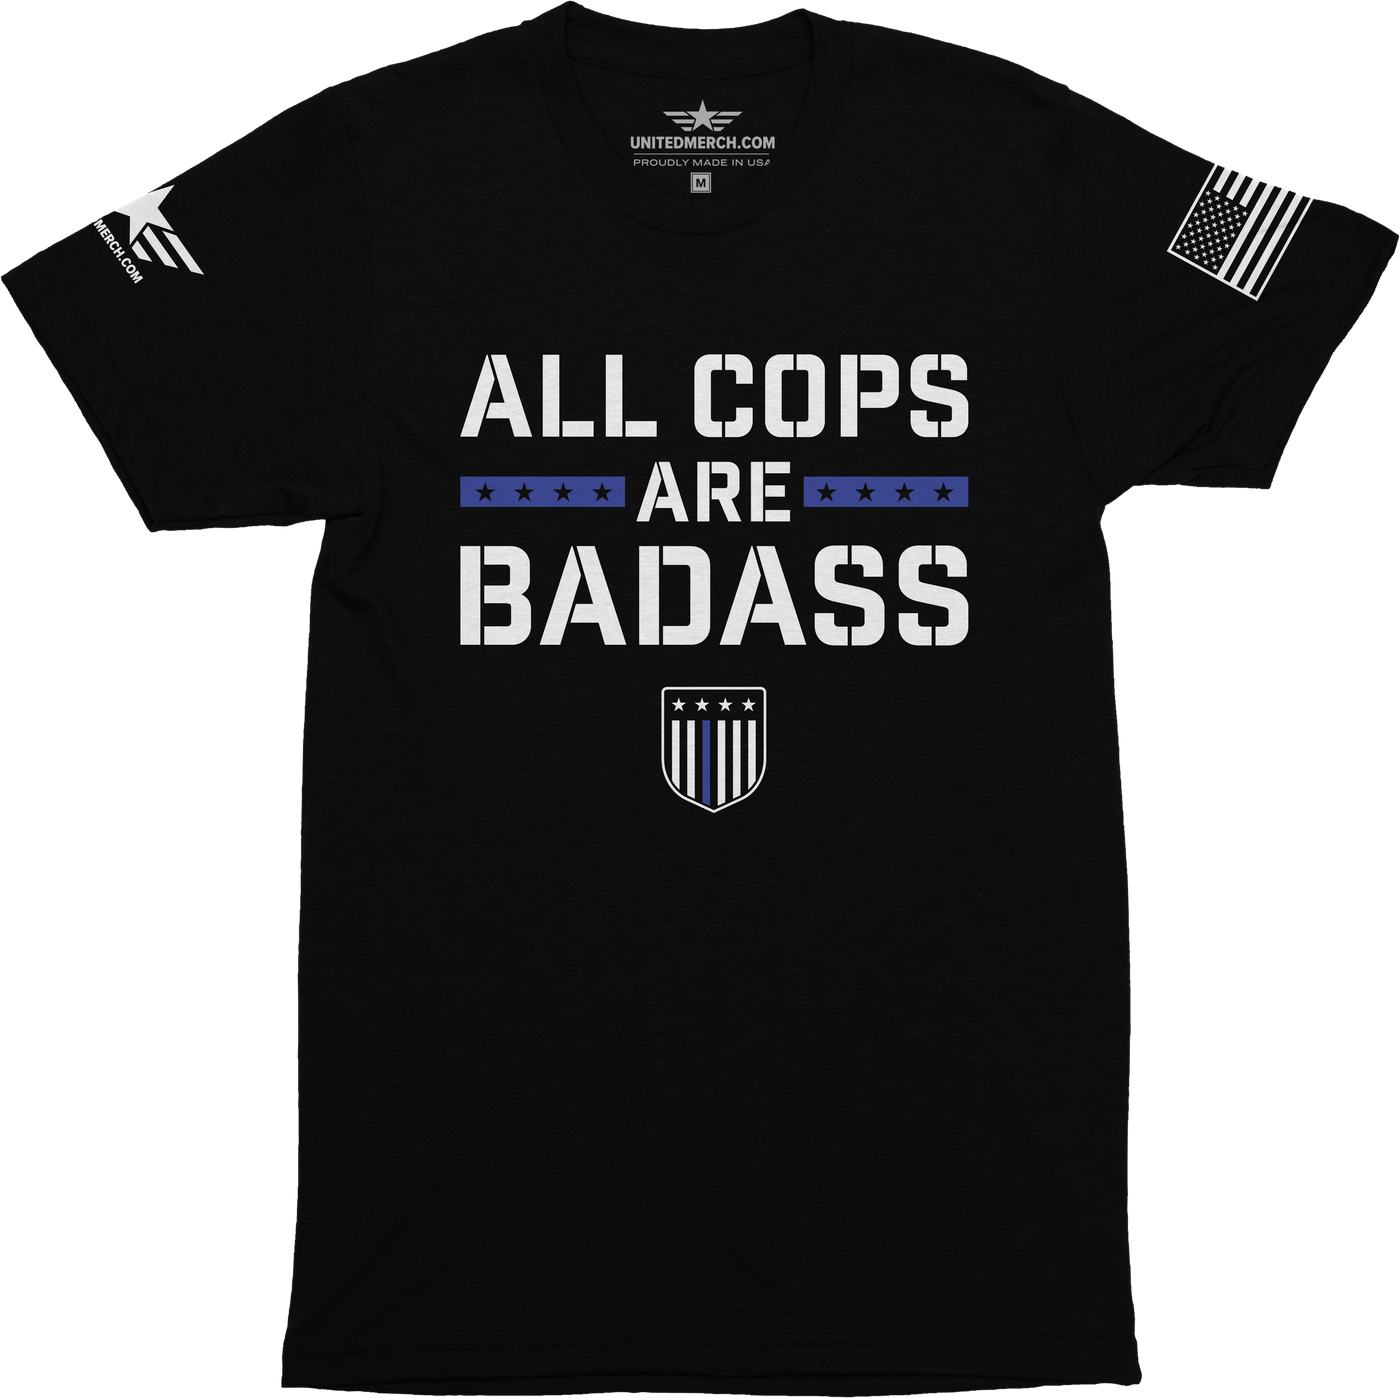 All Cops are Badass Tee